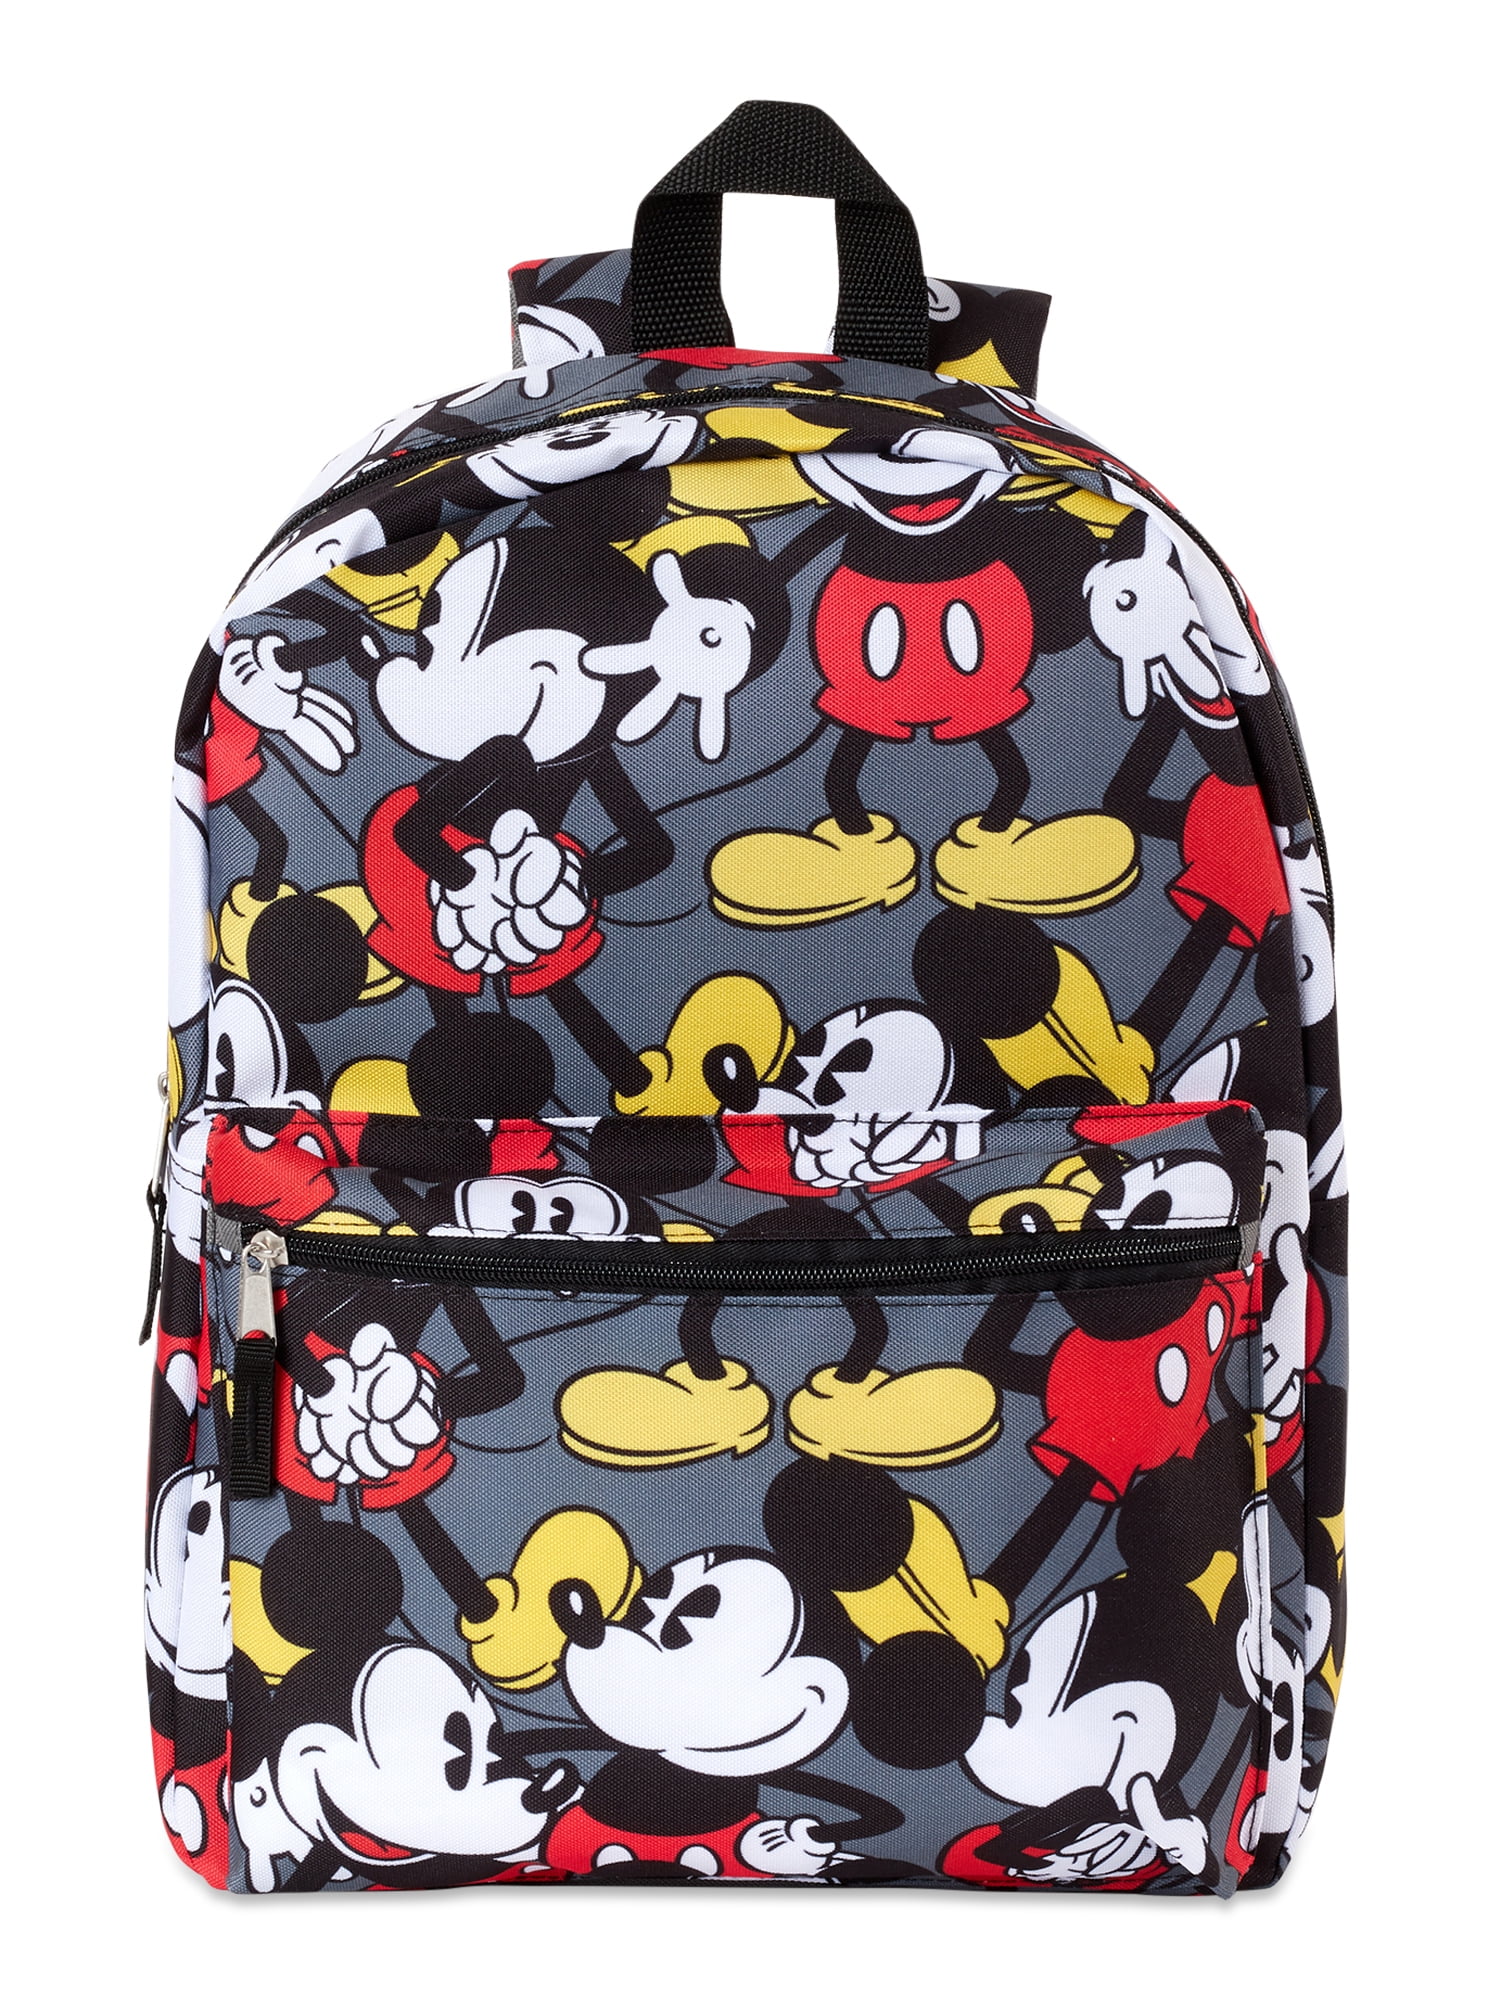 Disney Mickey Mouse White School All Print Book Bag Backpack 16" for Kids